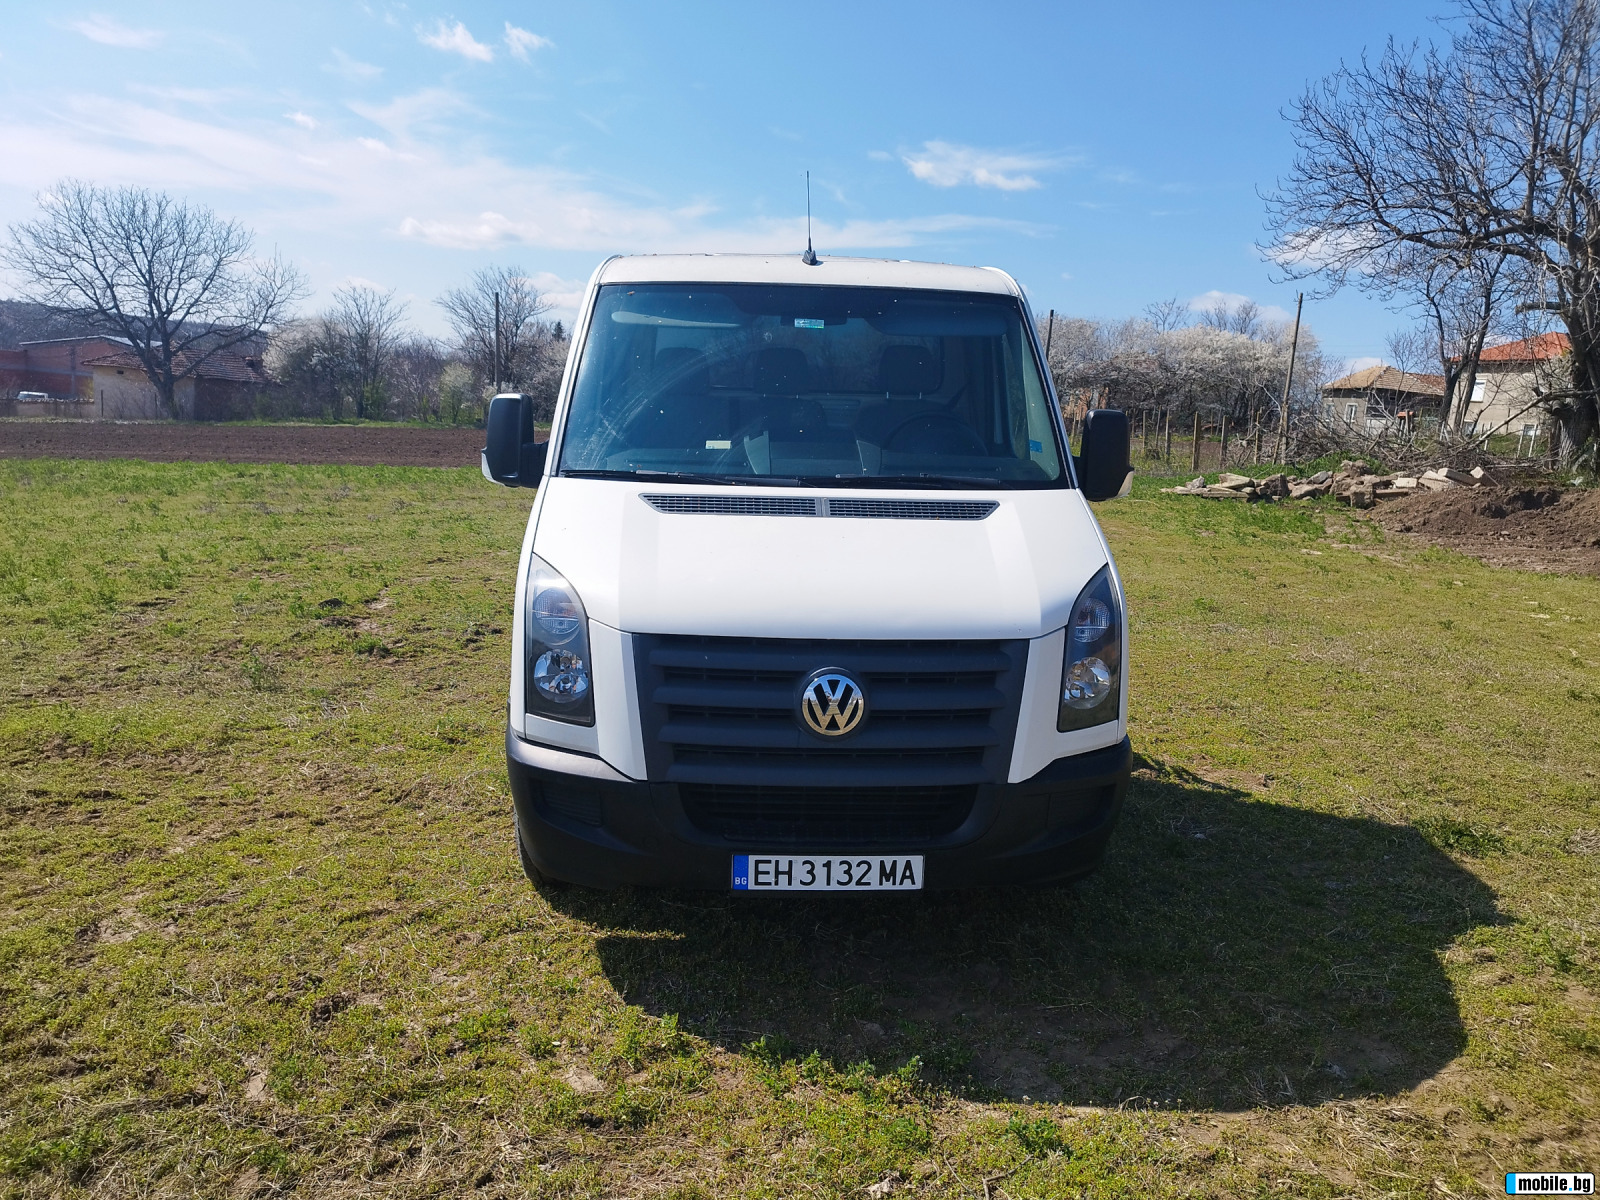 VW Crafter 2.5  /110ps | Mobile.bg   2